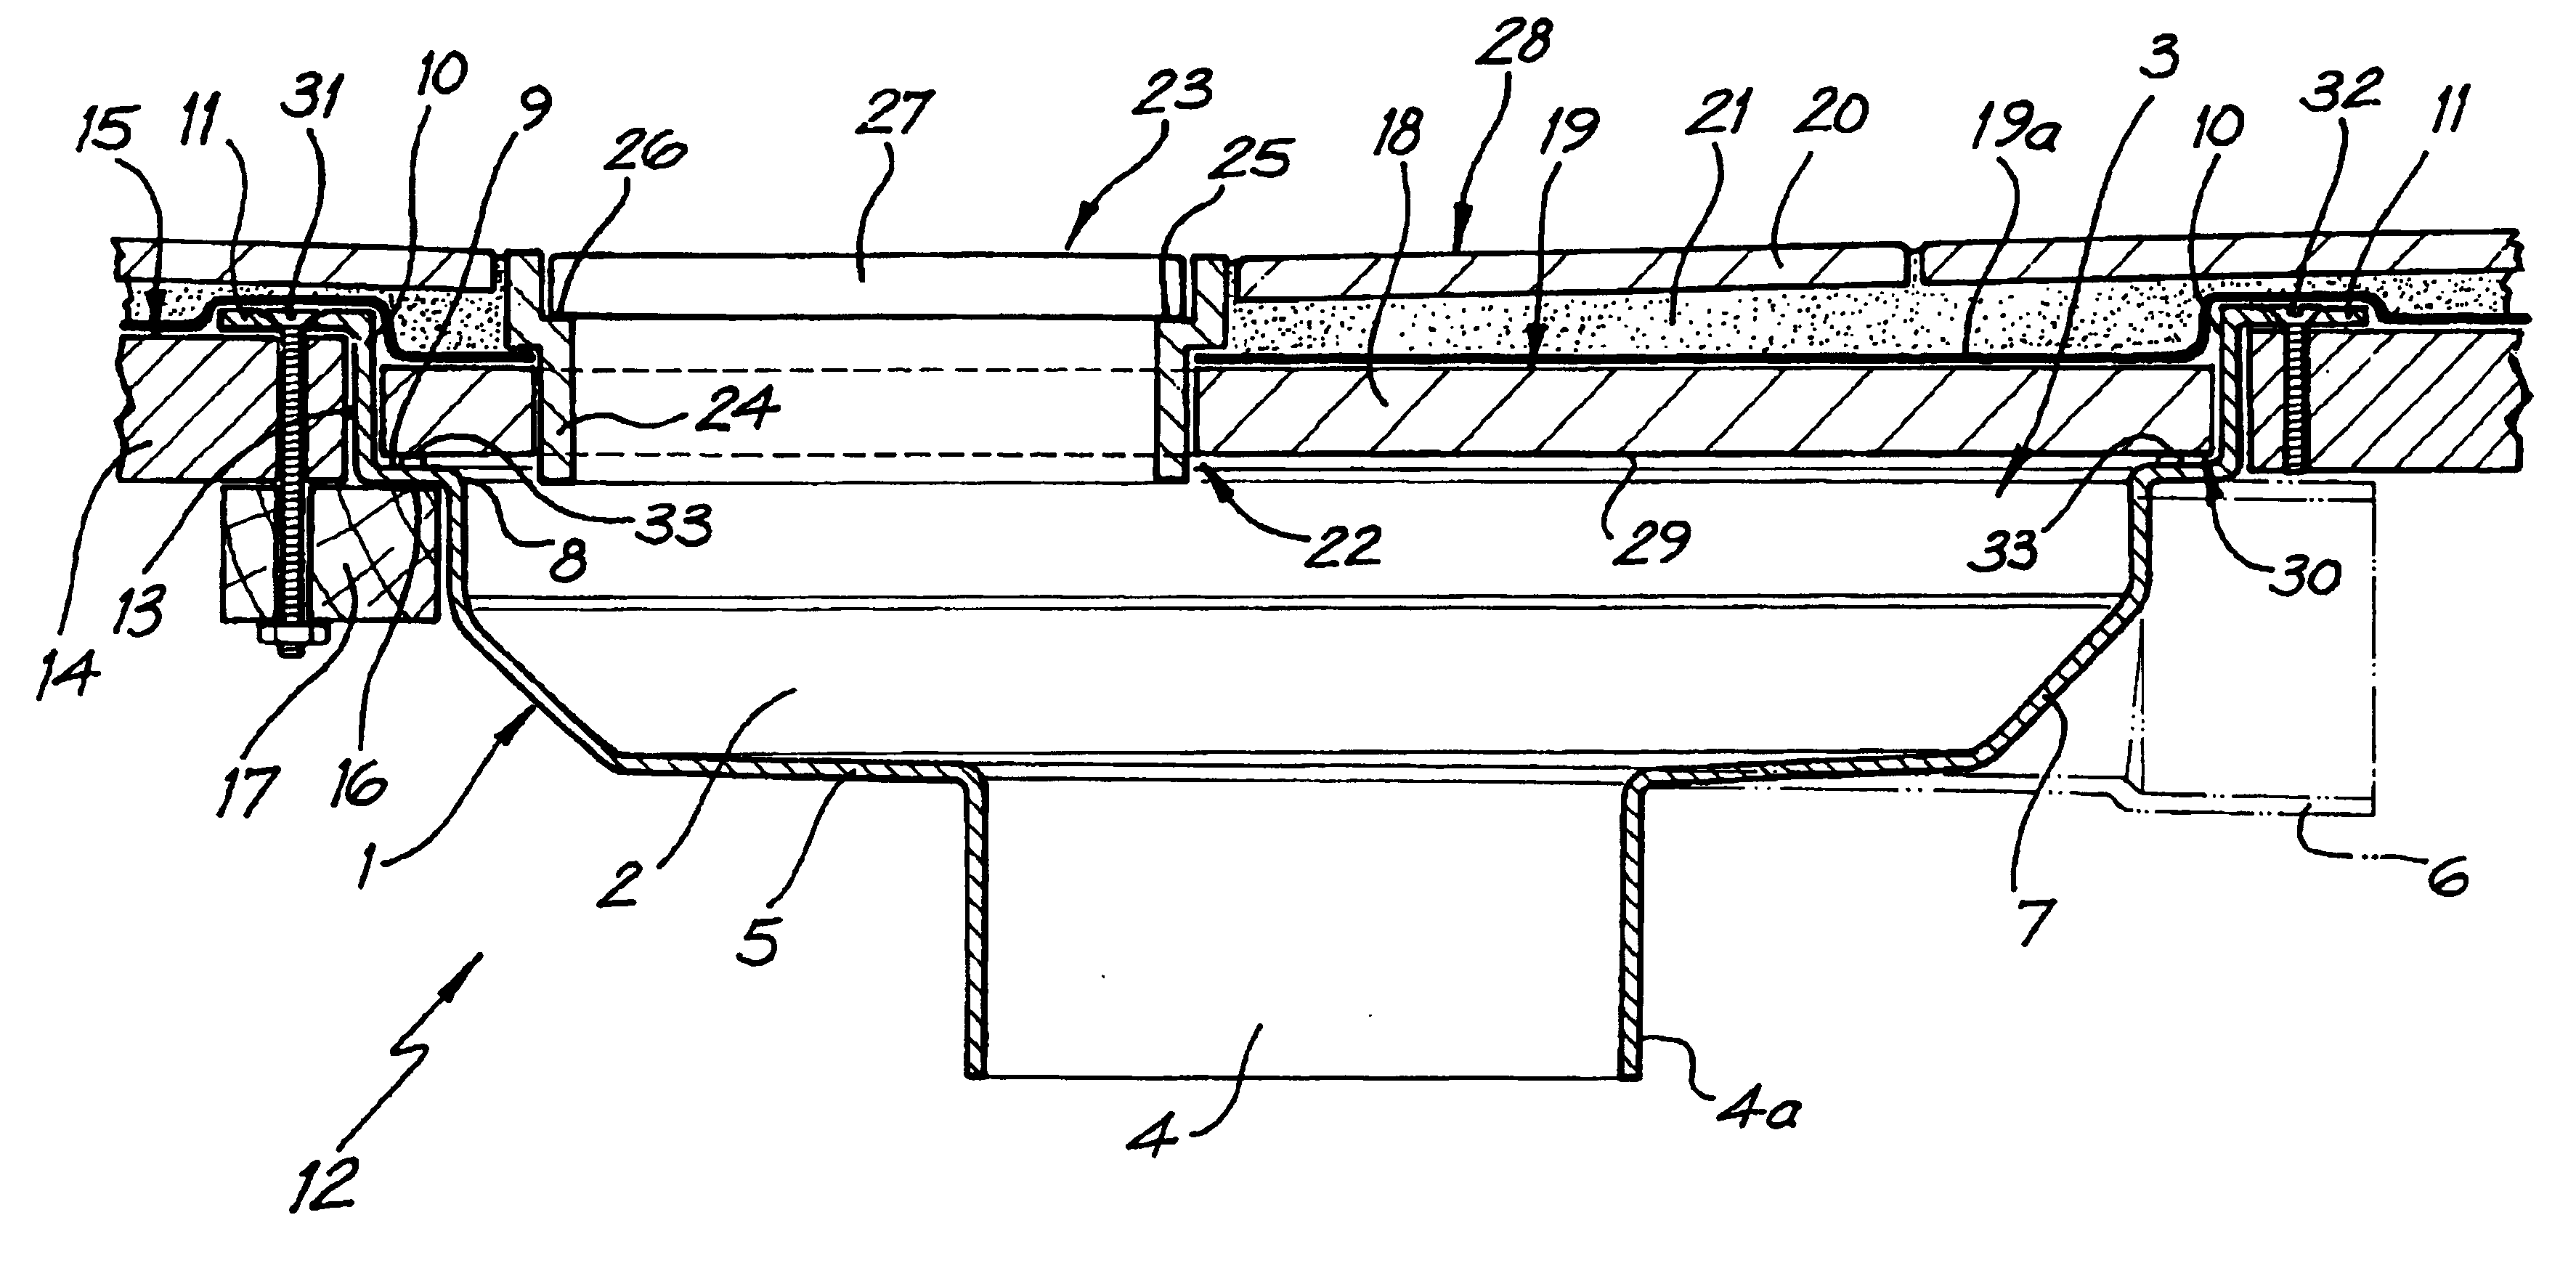 Waste assembly allowing adjustable fitment of a floor waste or appliance